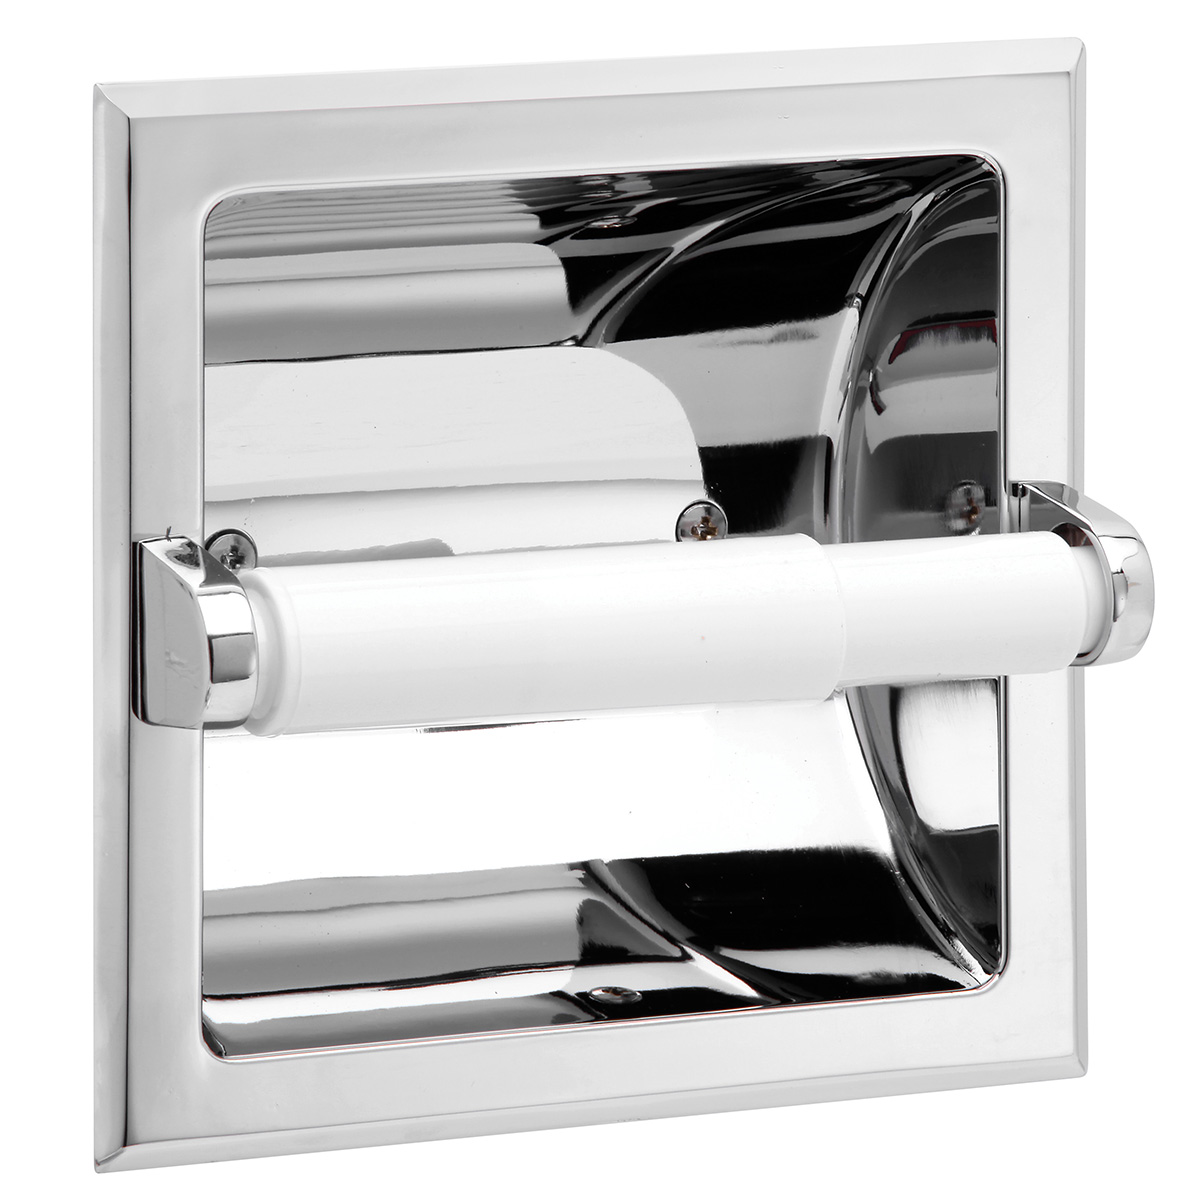 Sunglow - Recessed Paper Holder - Retail - Recessed Paper Holder - Polished Chrome